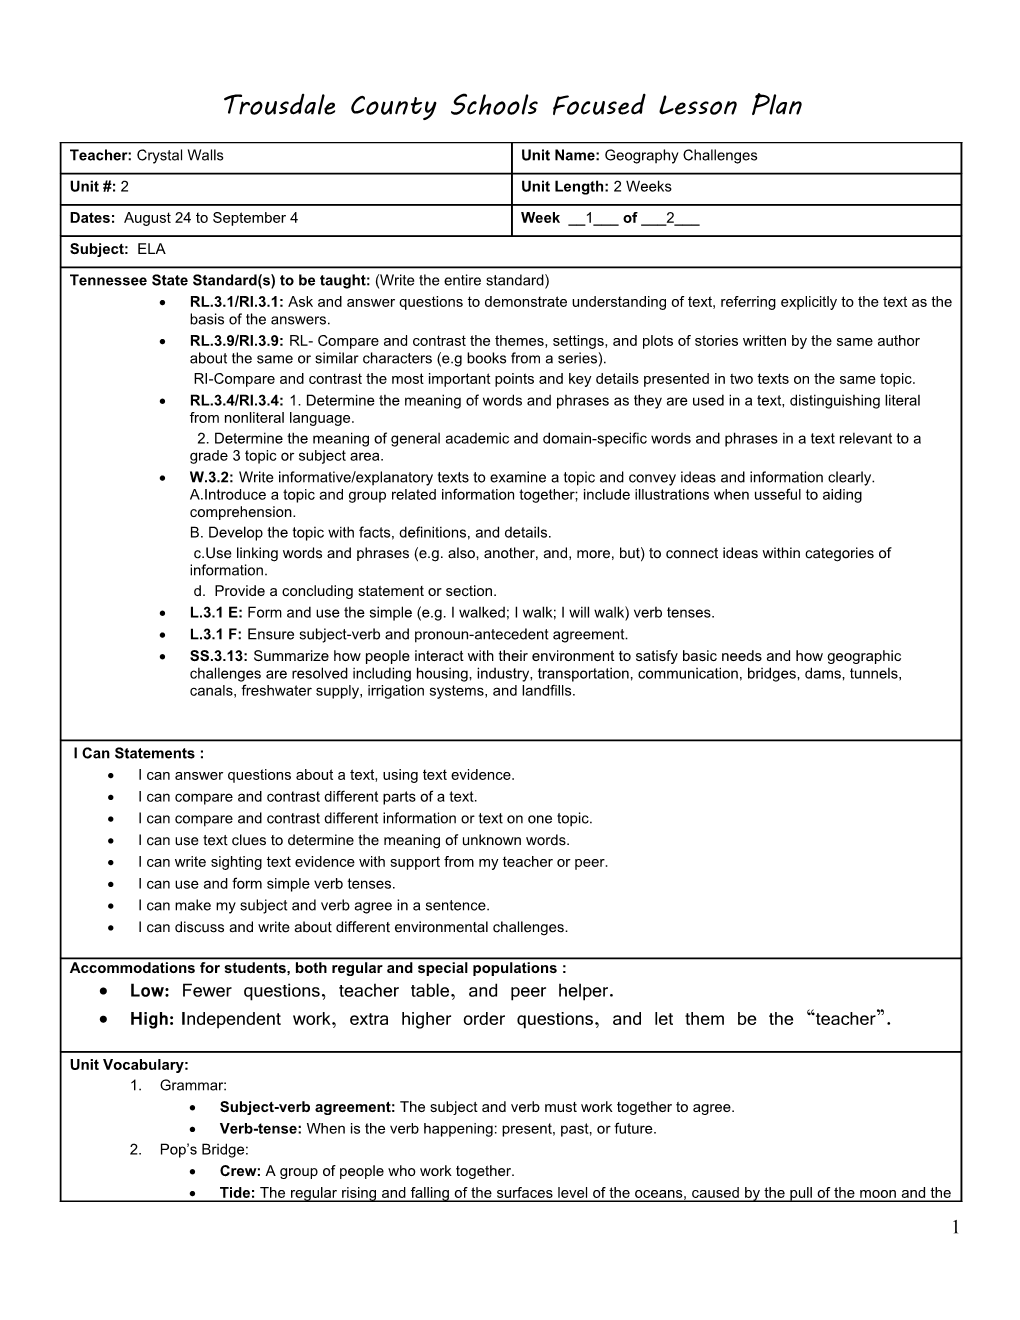 Lesson Plan Template s37